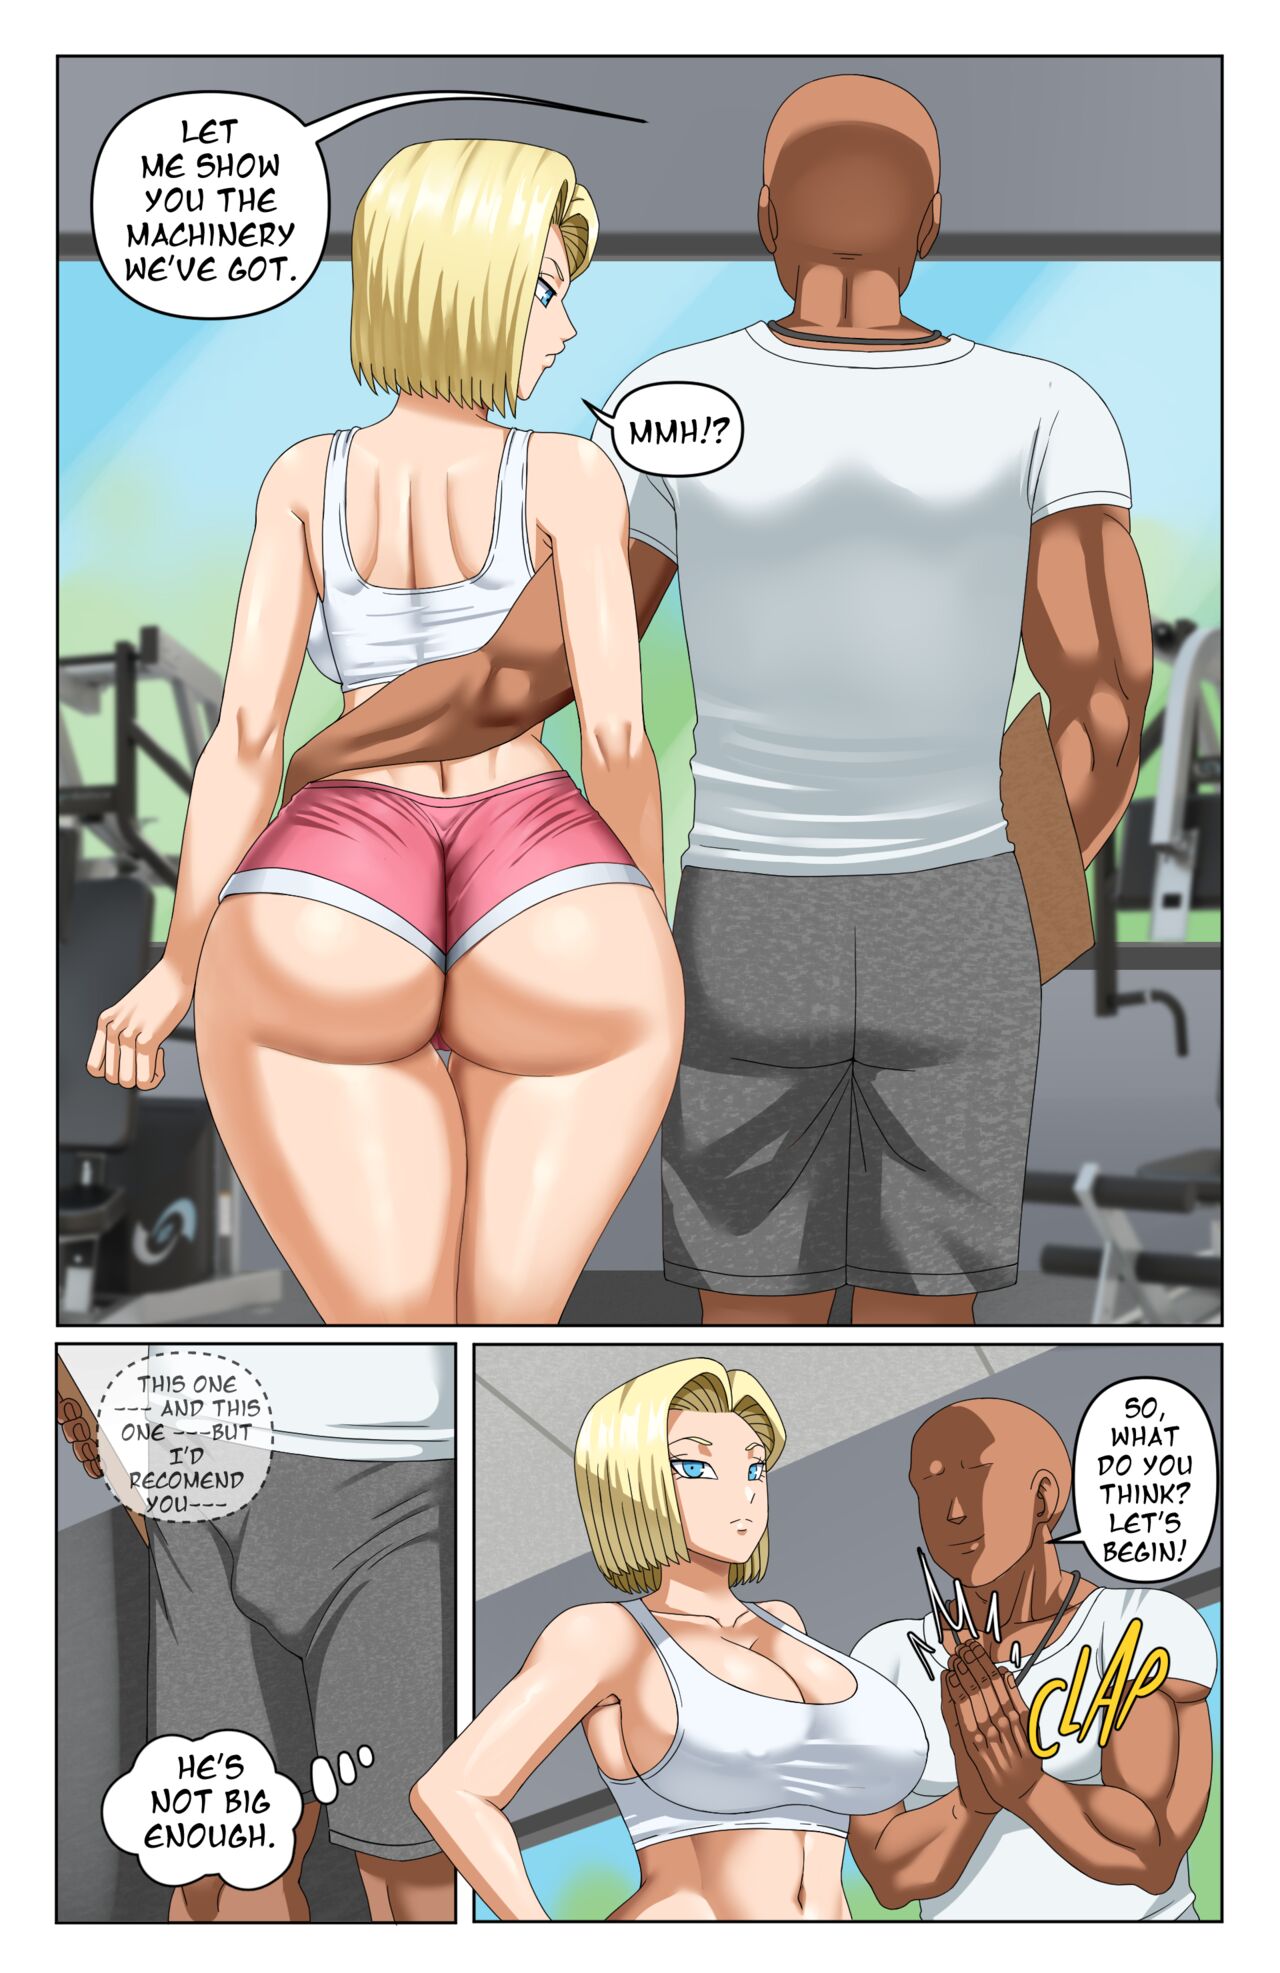 Android 18 Ntr 3 Pink Pawg 03